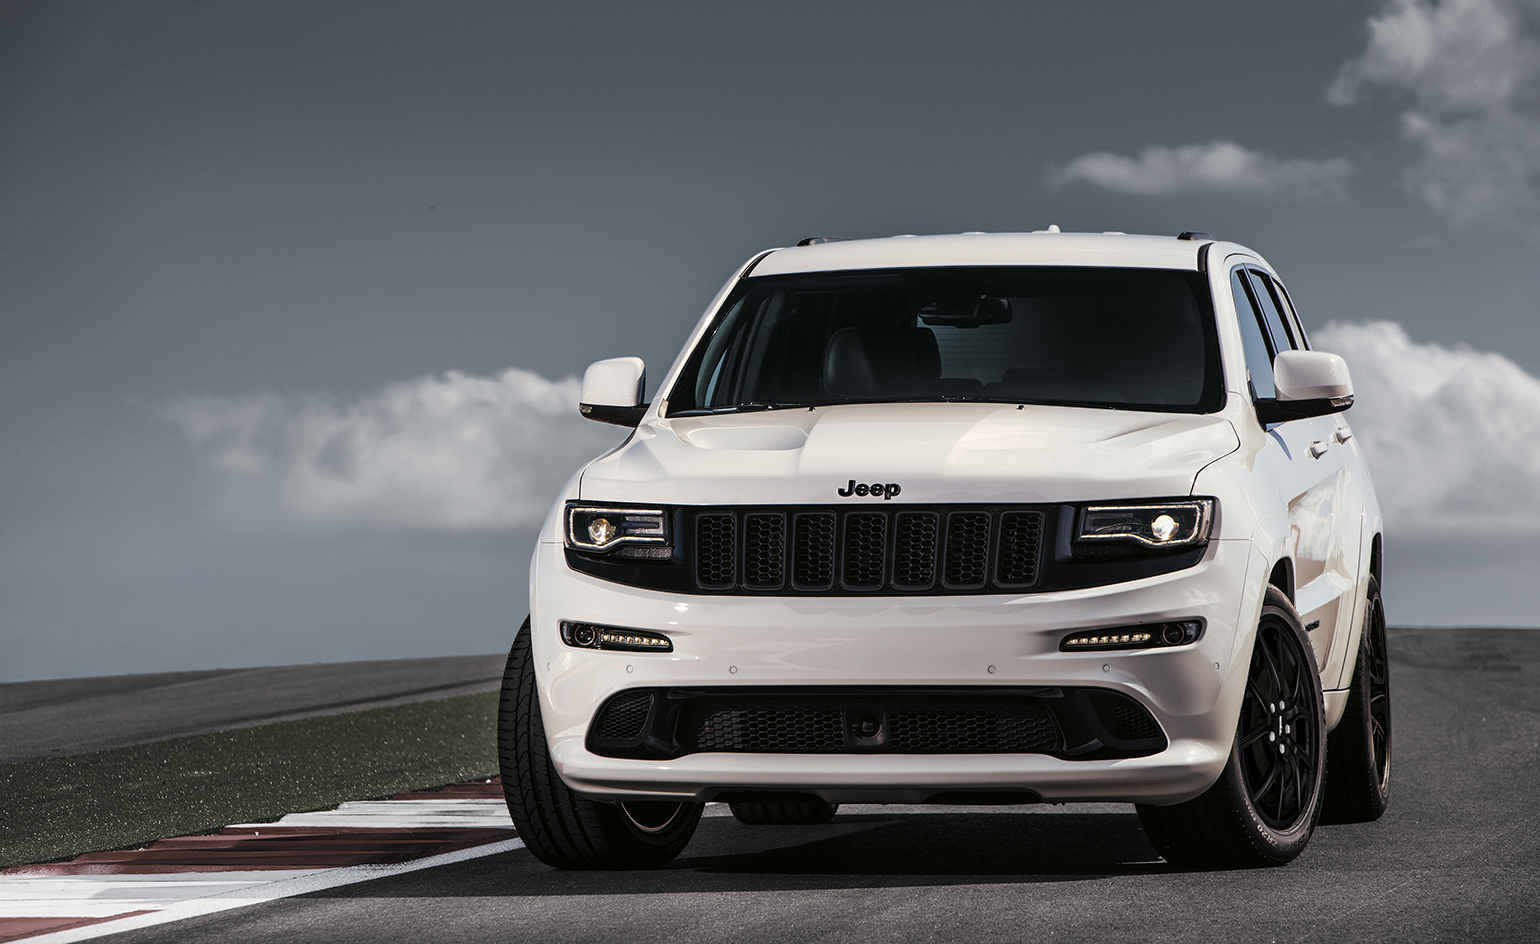 Jeep Grand Cherokee Images - Interior & Exterior Photo Gallery [150+ Images]  - CarWale